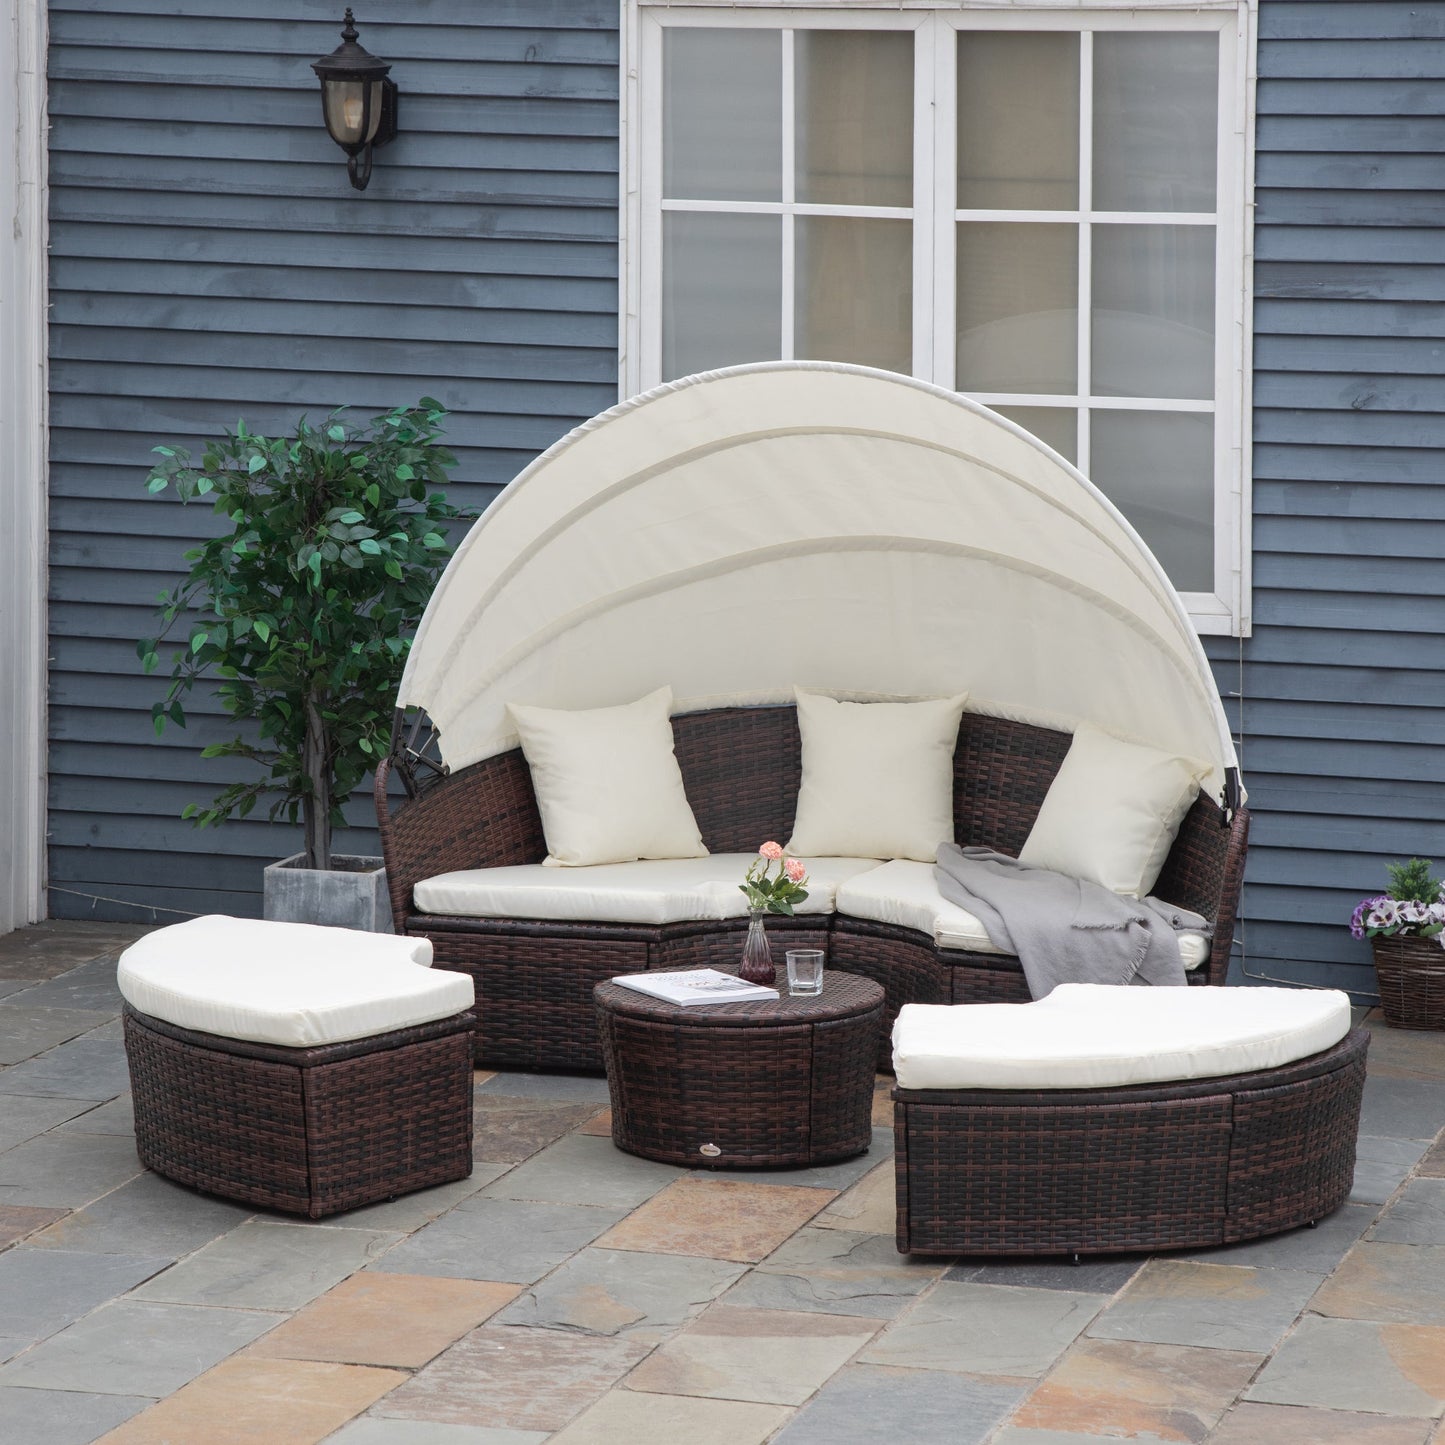 Outdoor and Garden-4-piece Cushioned Outdoor Rattan Wicker Round Sunbed or Conversational Sofa Set with Sun Canopy for Lawn Garden Backyard Poolside, Beige - Outdoor Style Company